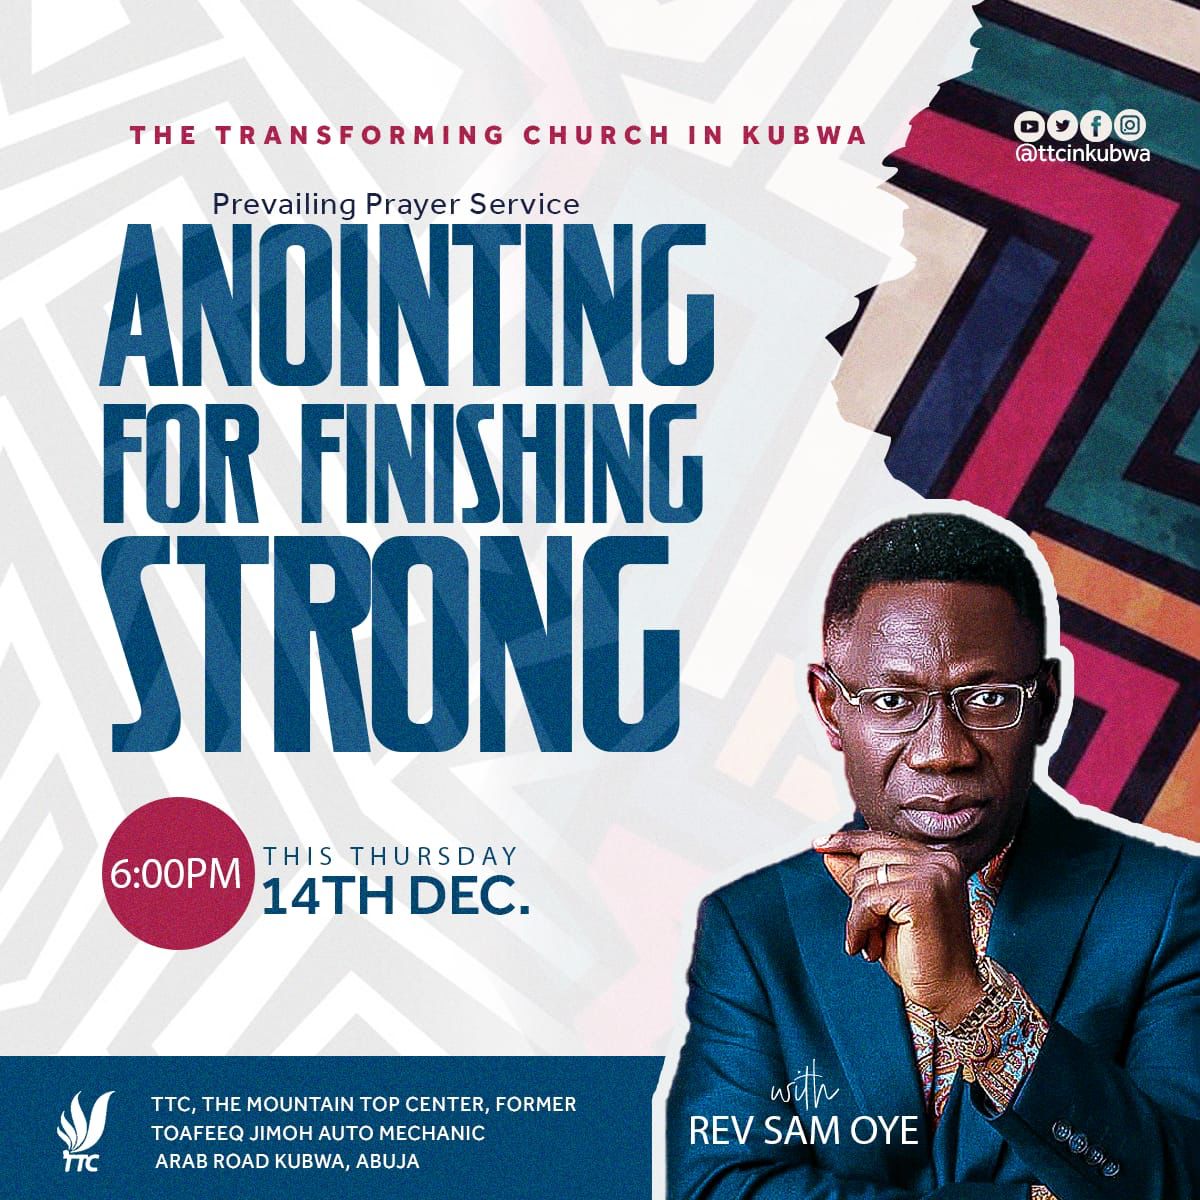 We are inviting you to come join us as we embrace the anointing that empowers us to persevere, overcome, and finish the race strong in faith. 

Don’t miss this soul-reviving experience – your path to a triumphant finish starts here. 
#ttcinkubwa #finishingstrong